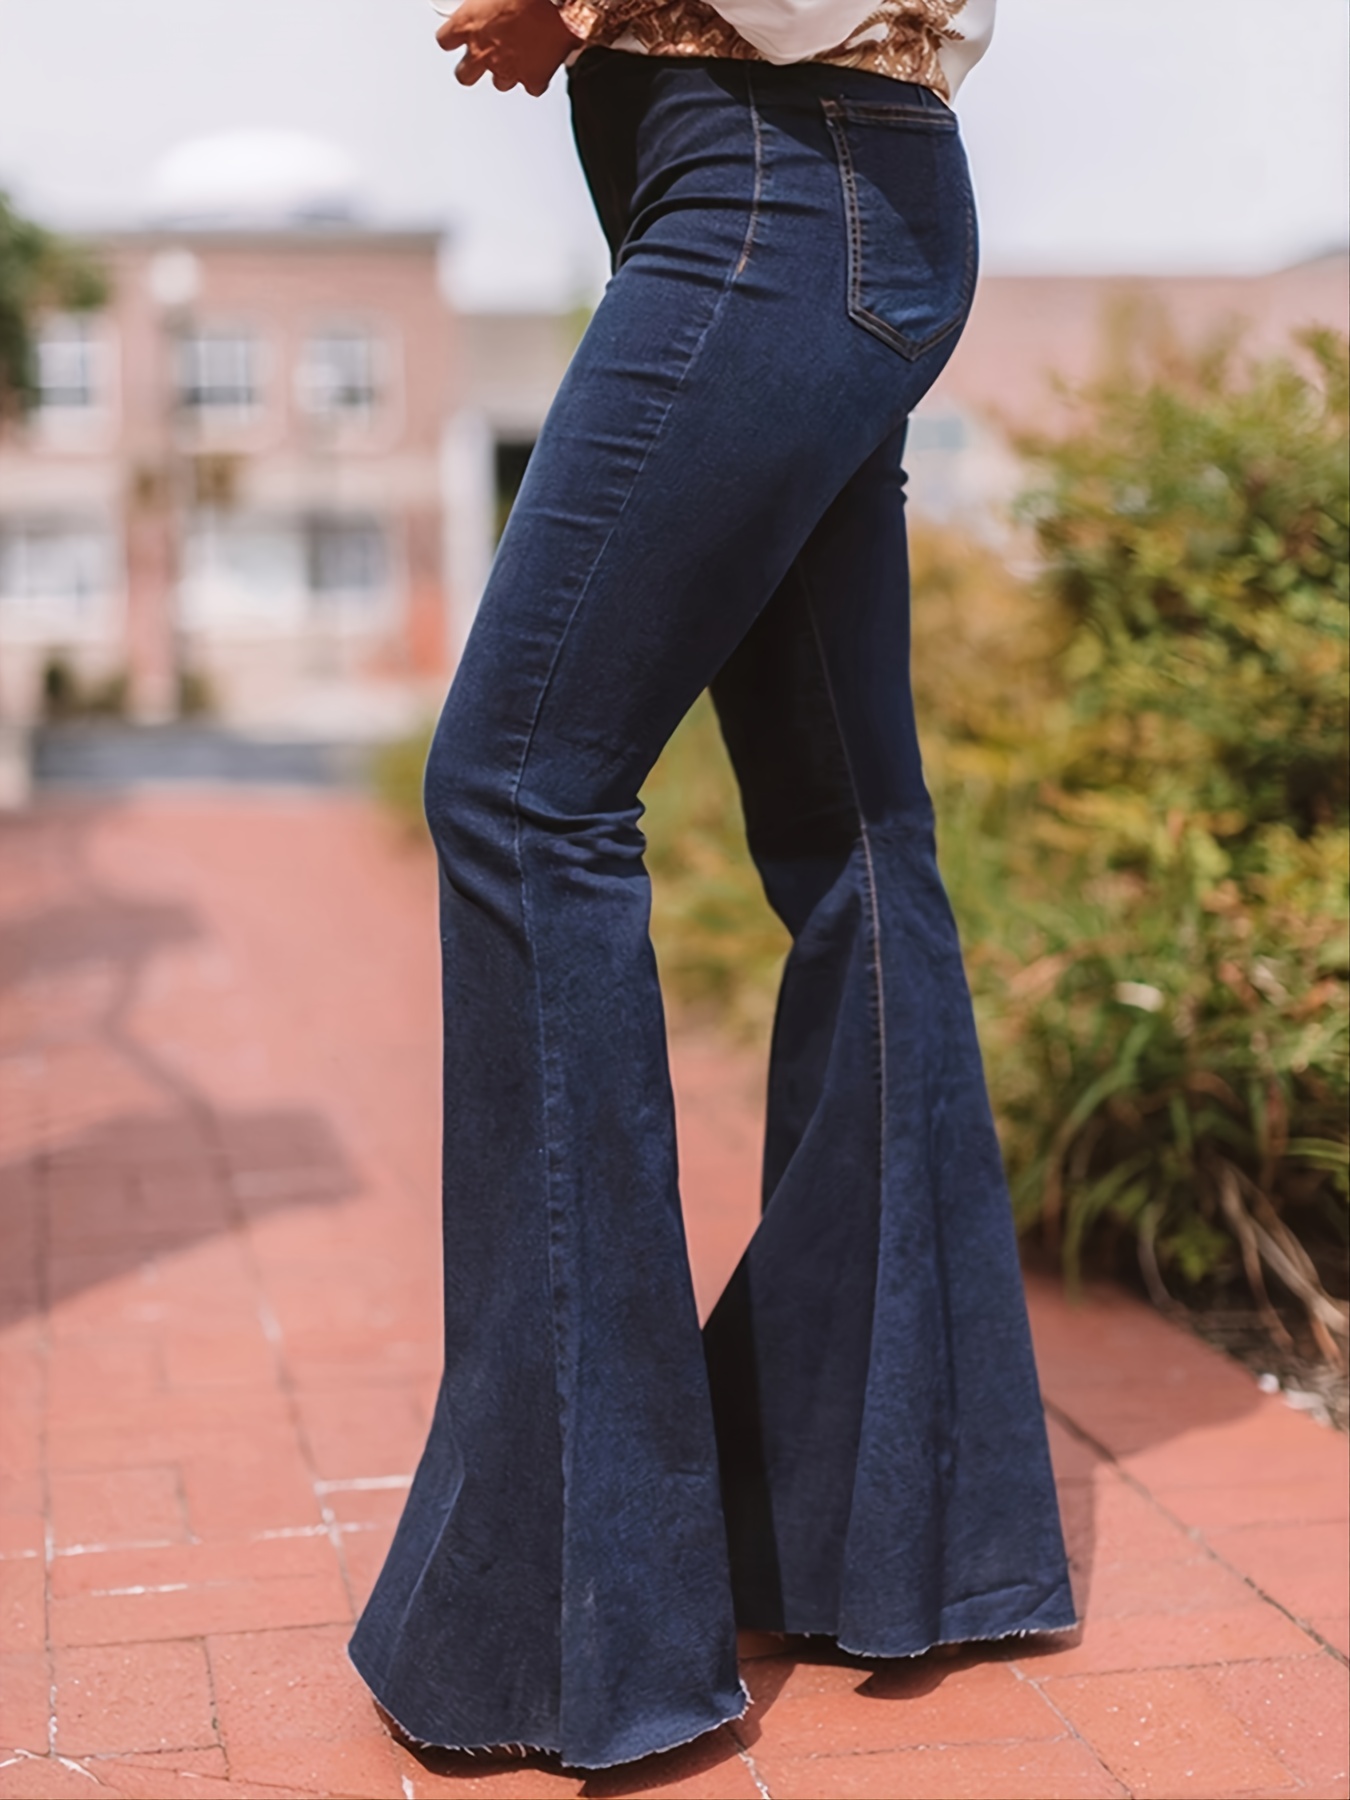 Brown Spring High Waist Oversized Jeans Slimming2021Loose Flared Pants  Women's New Micro-Pull Retro Wide-Leg Pants